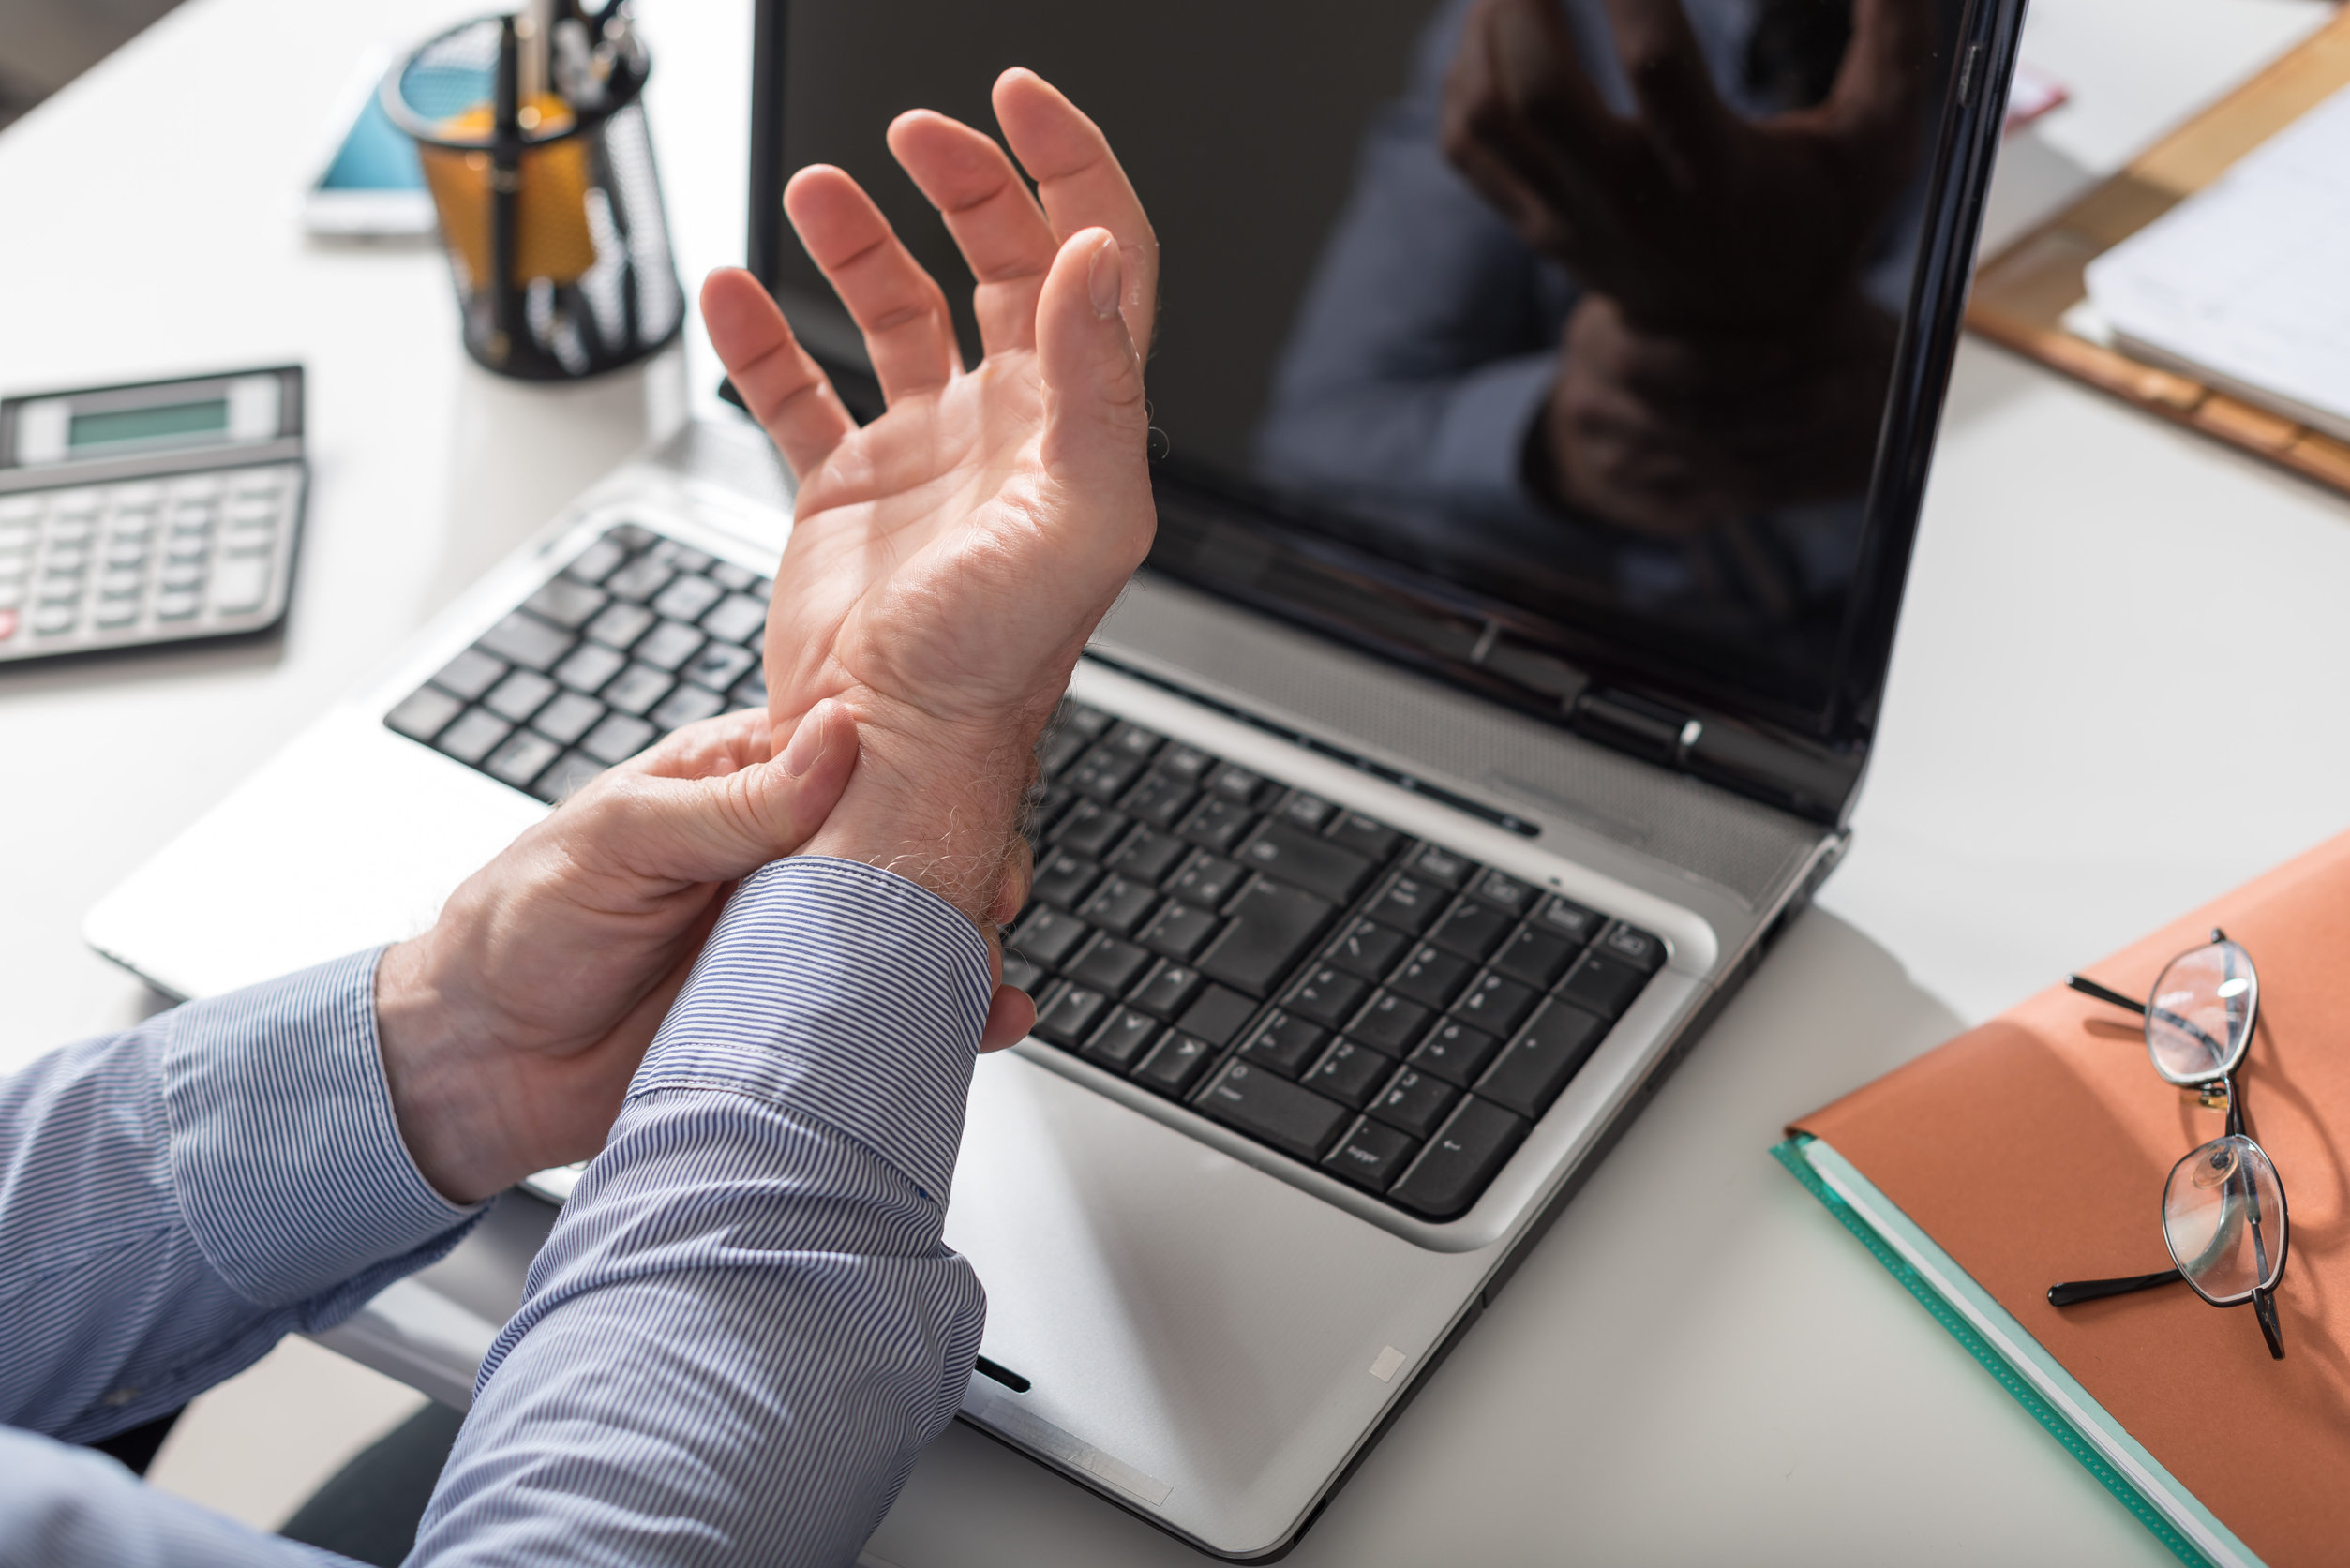 5 Ways to Prevent Carpal Tunnel Syndrome